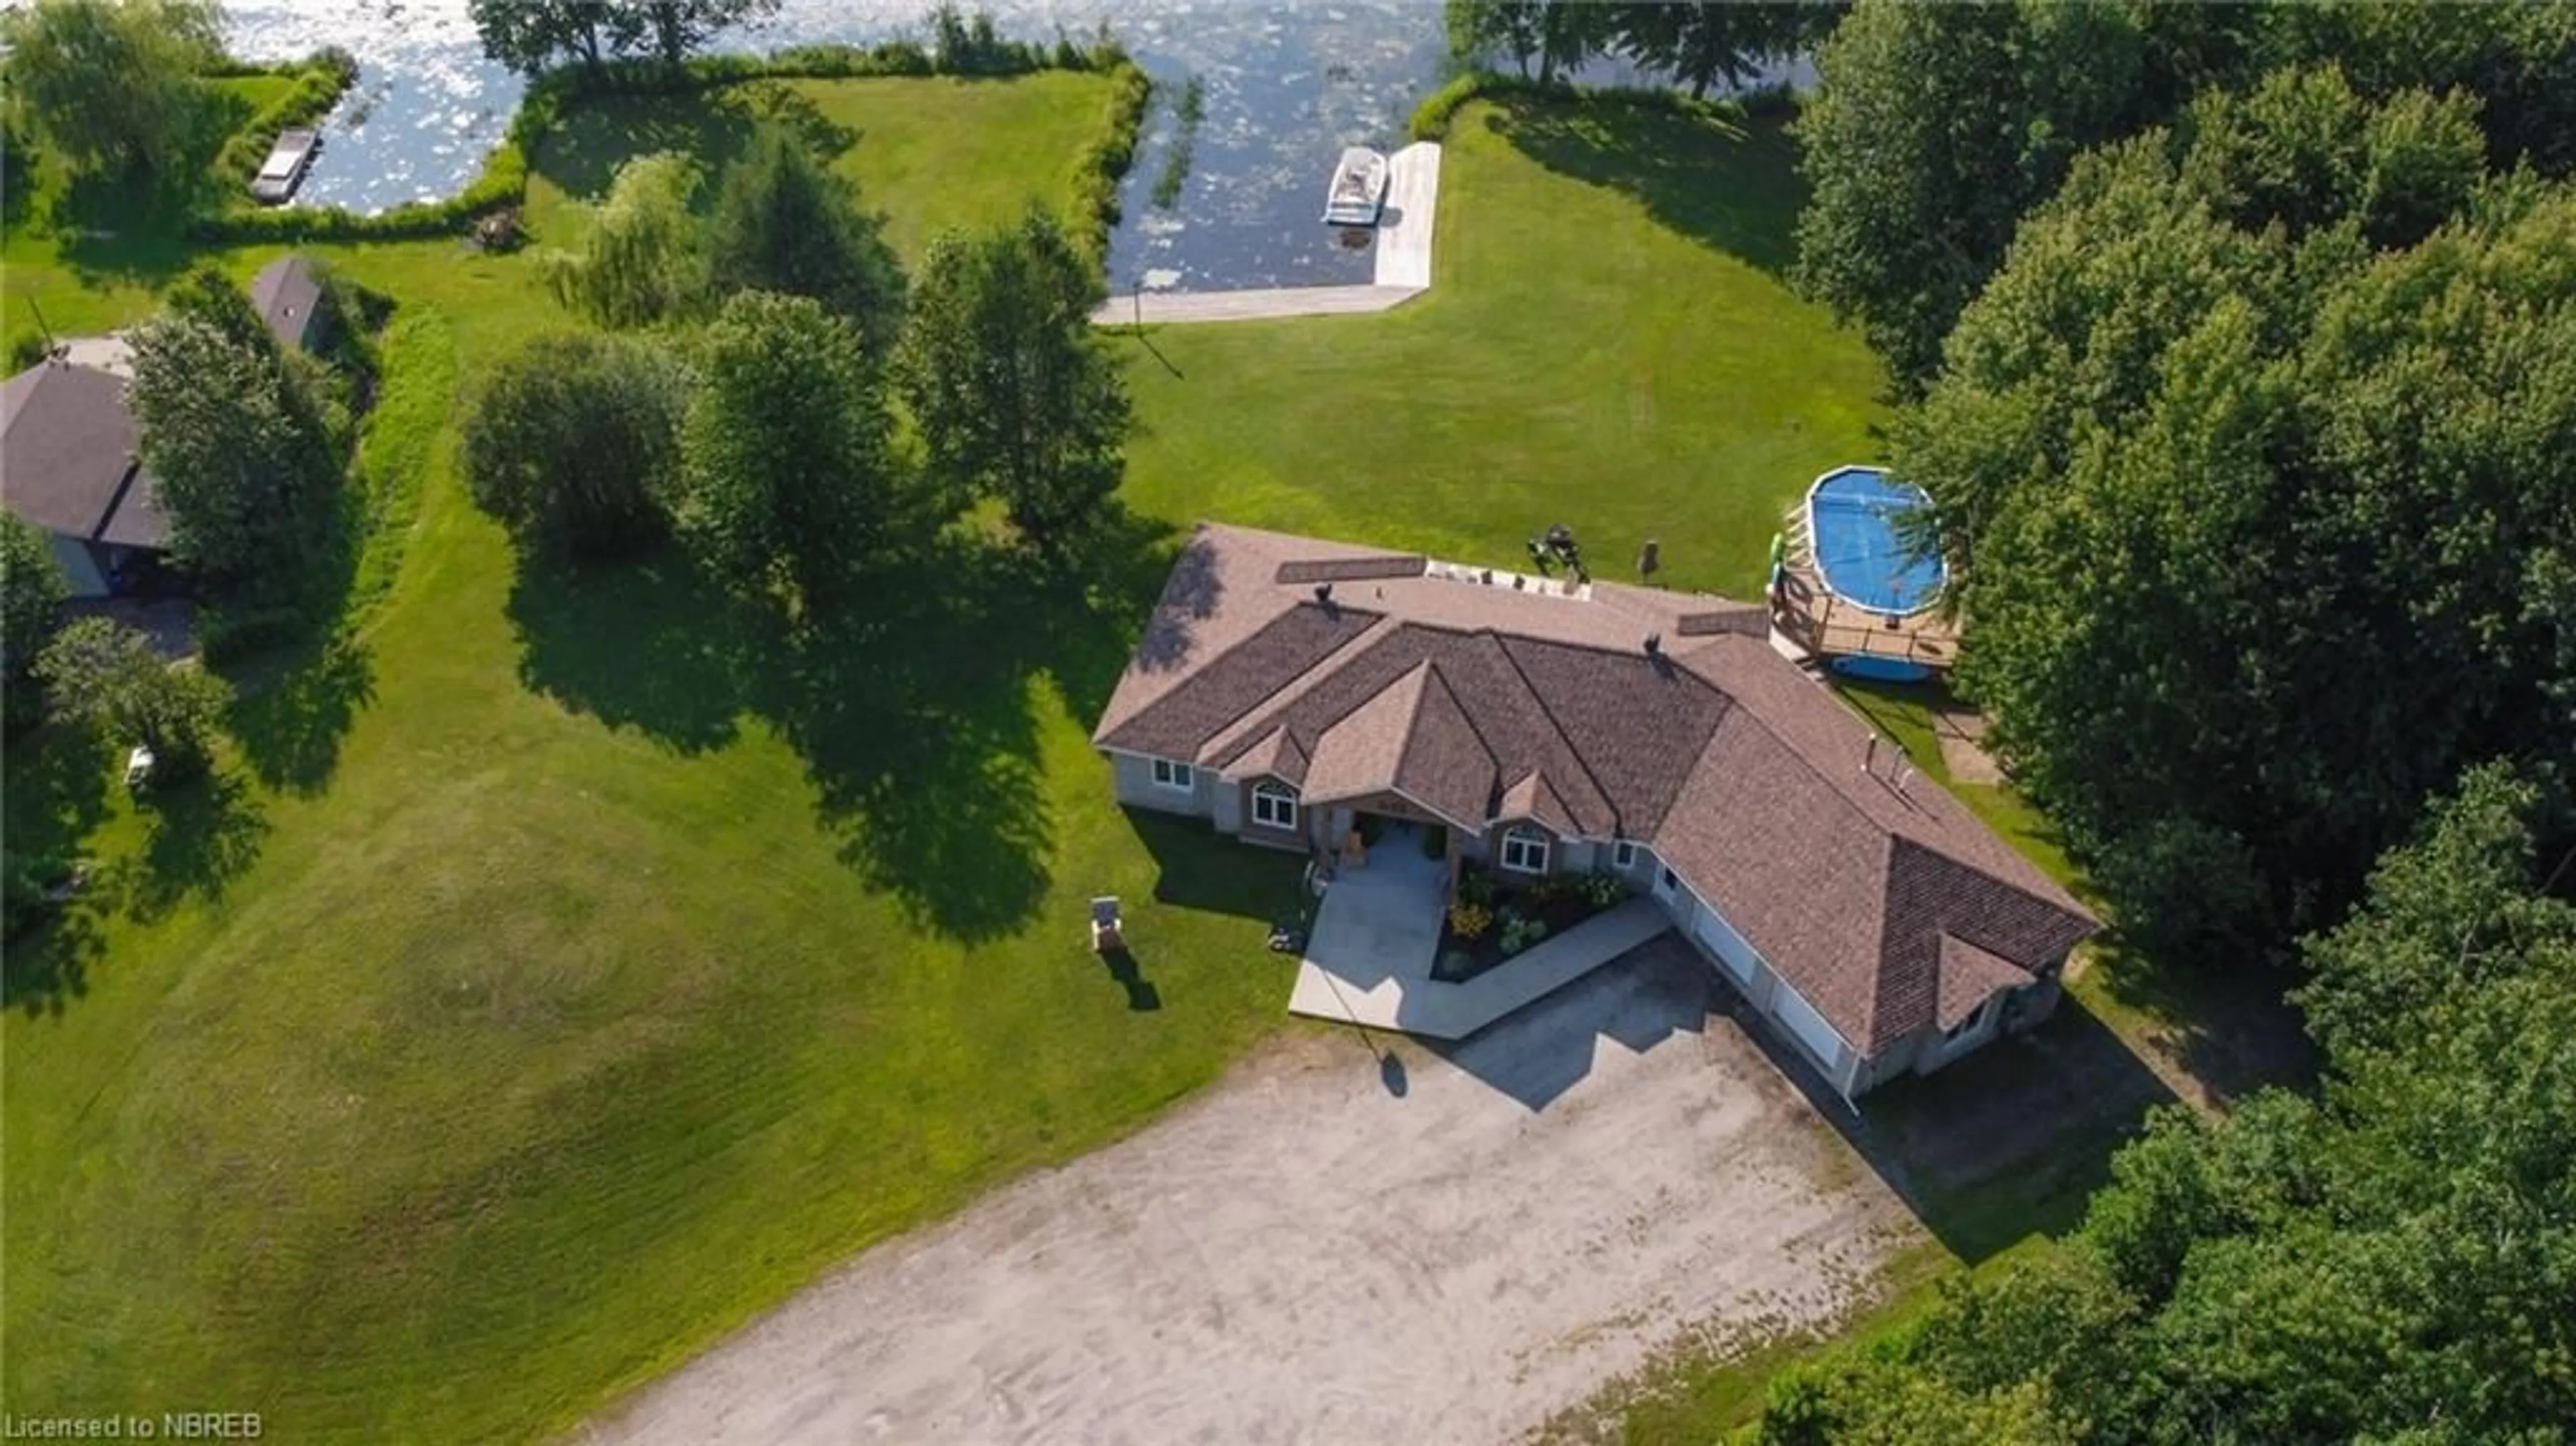 Cottage for 615 Riverbend Rd, North Bay Ontario P1B 8Z4